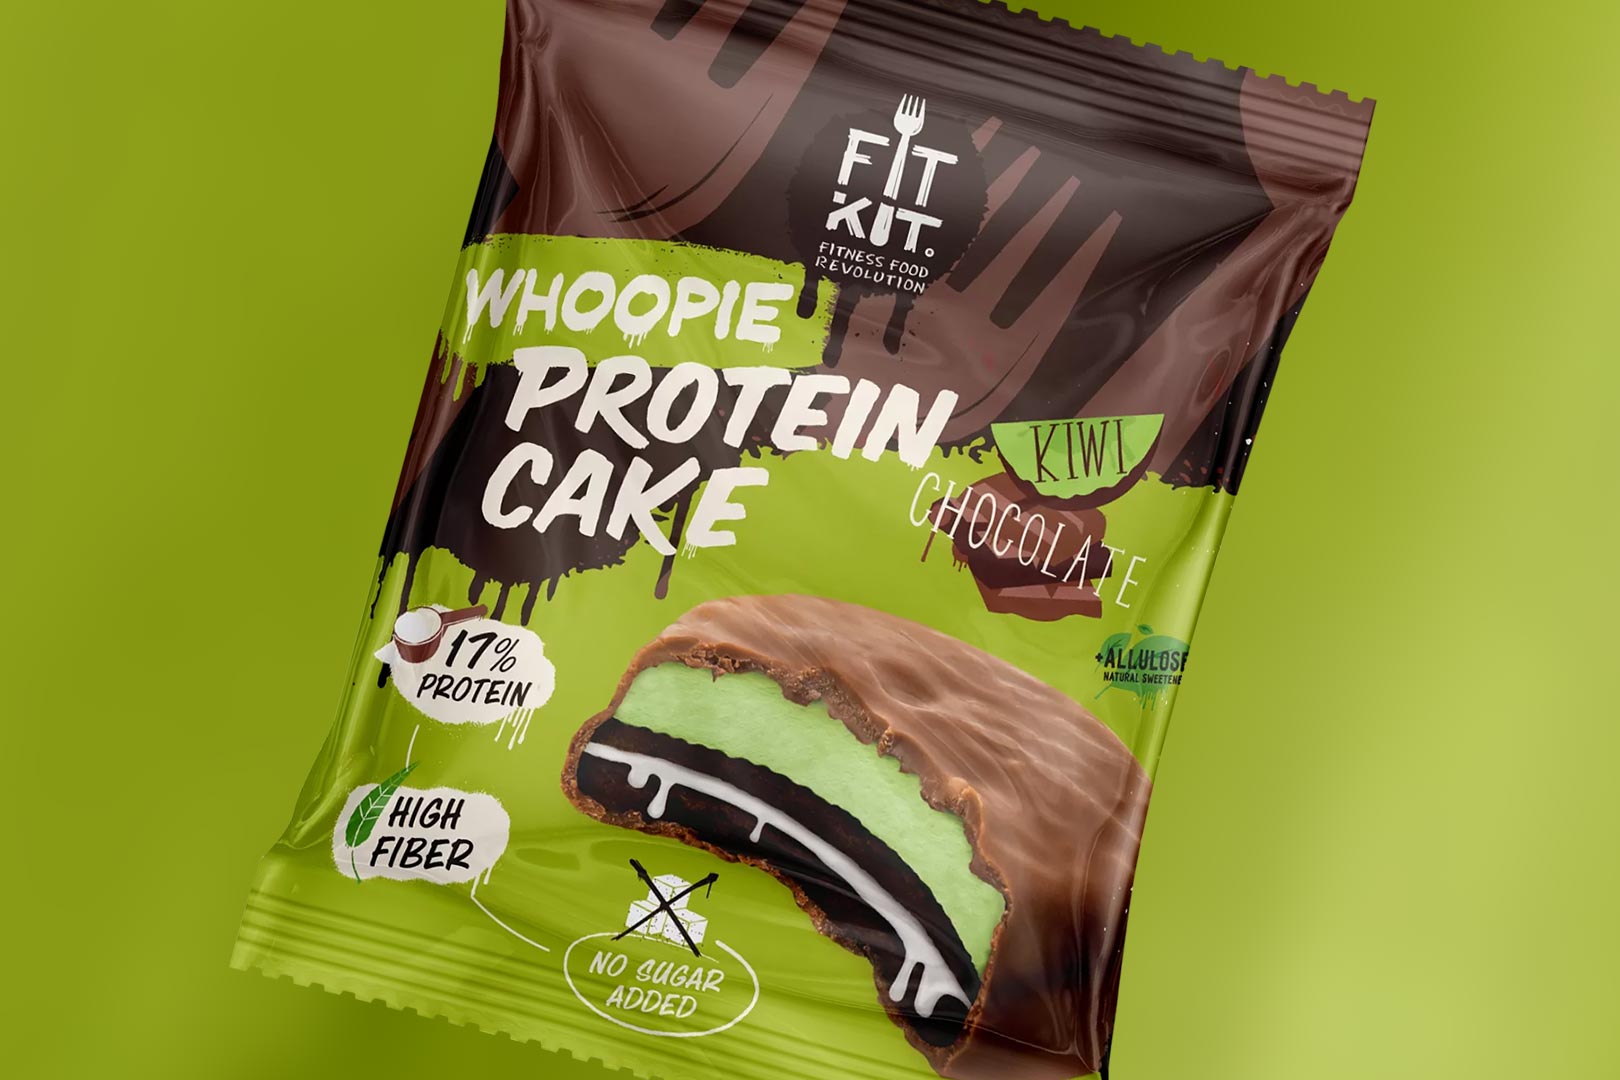 Fit Kit Whoopie Protein Cake